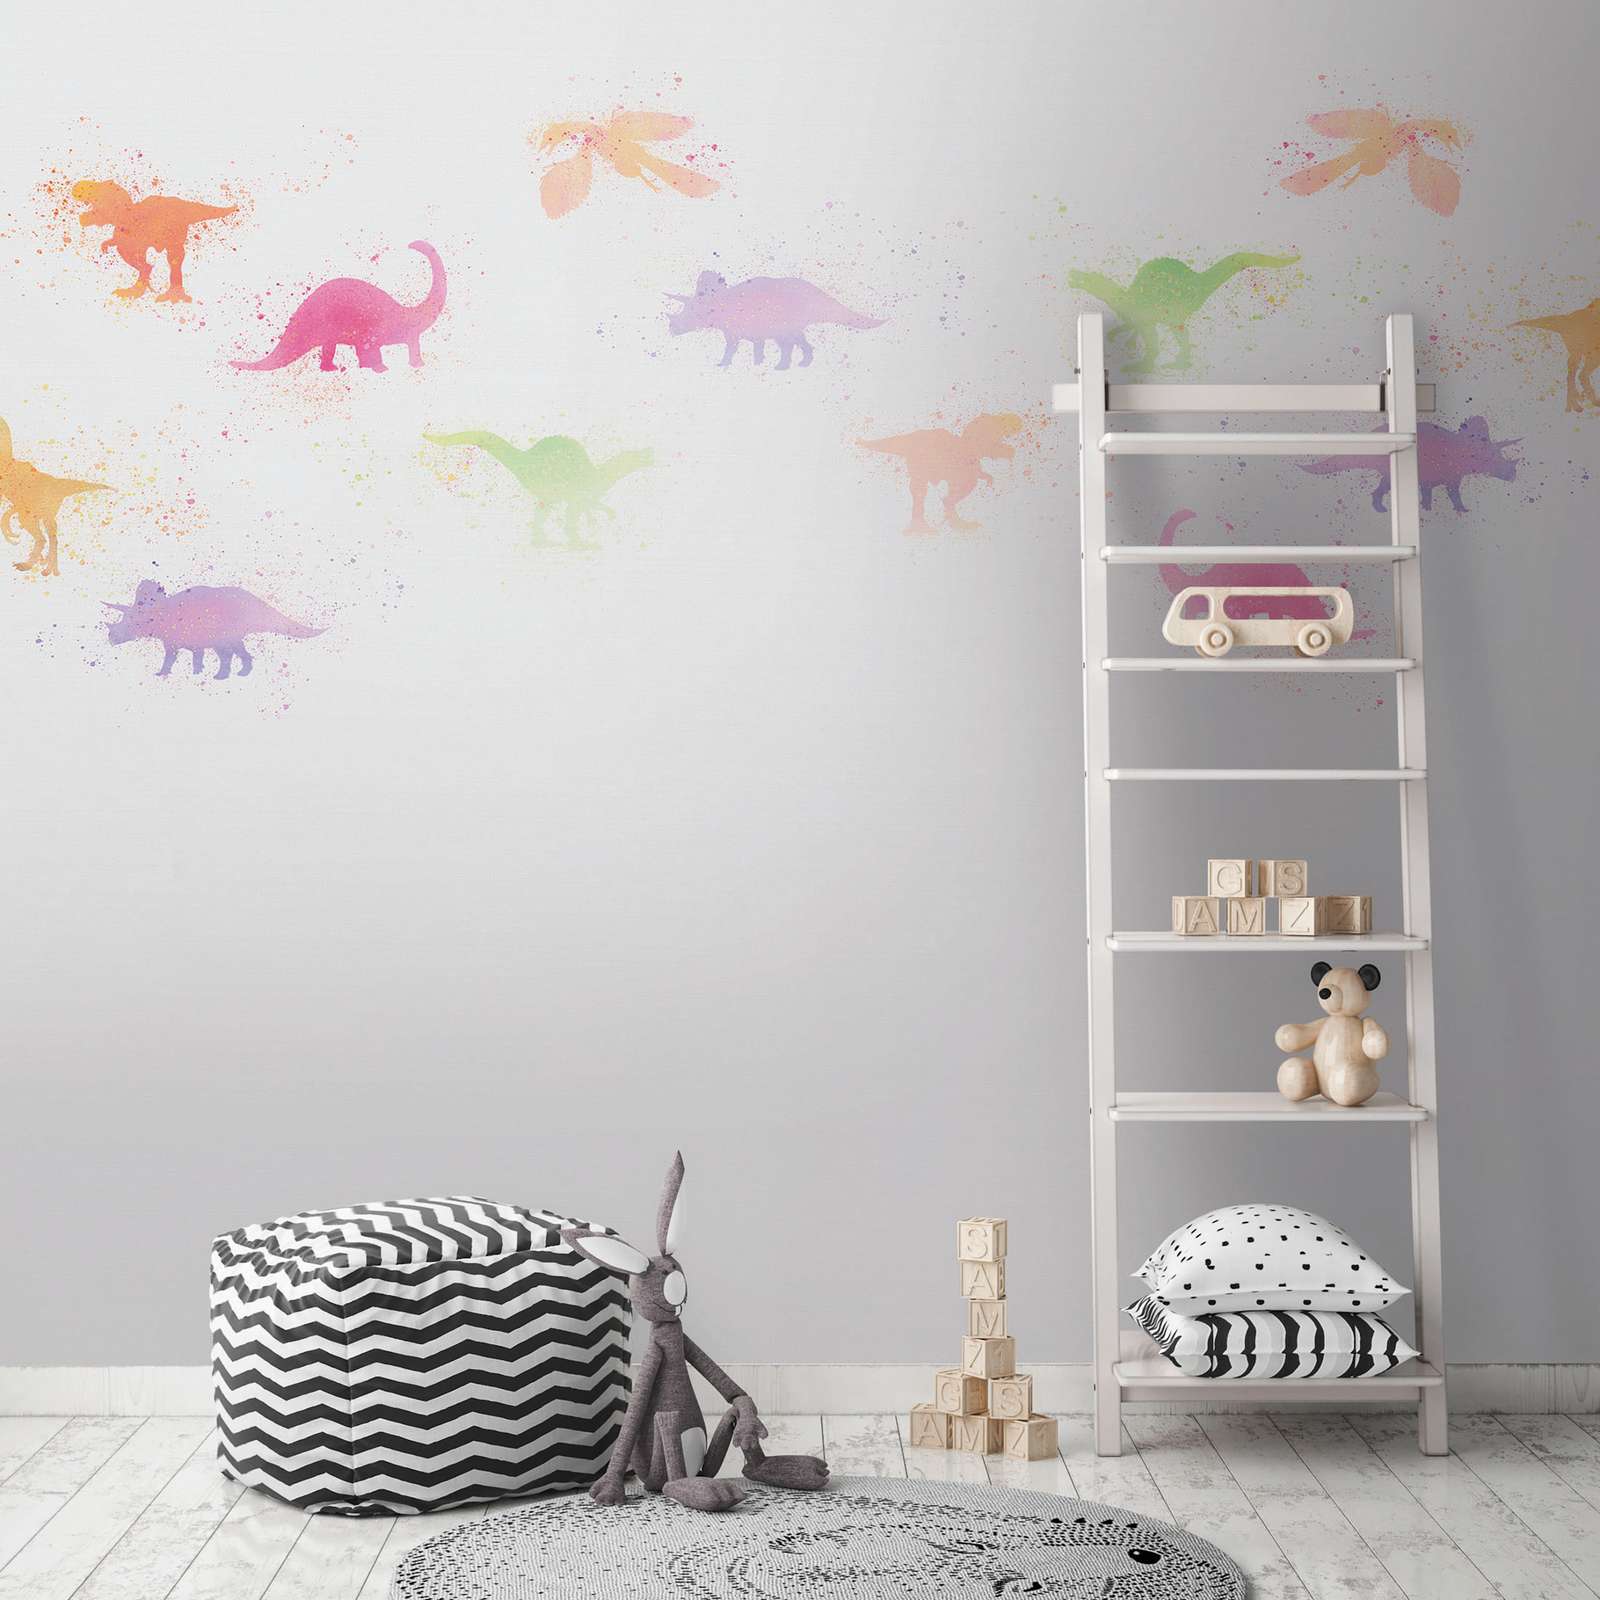             Nursery Wallpaper with Little Dinosaurs - Colourful, White
        